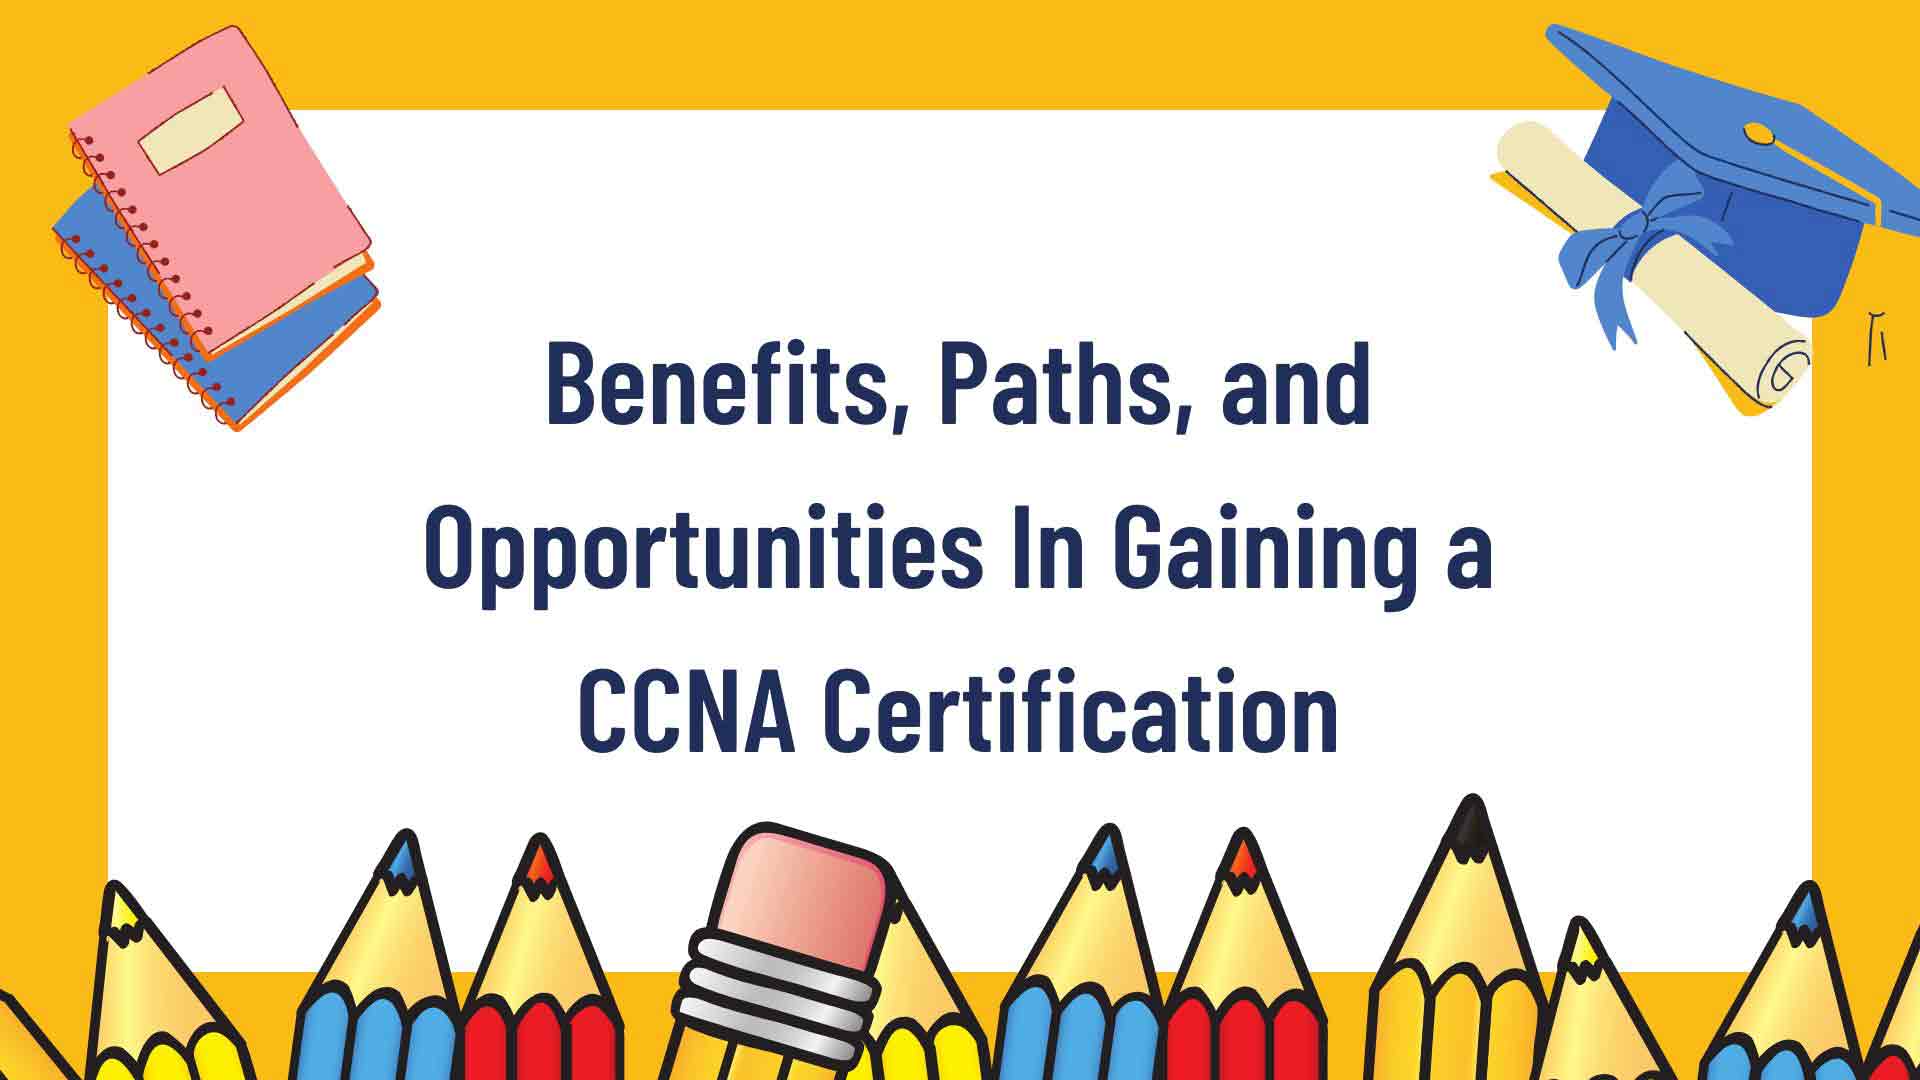 Gaining a CCNA Certification